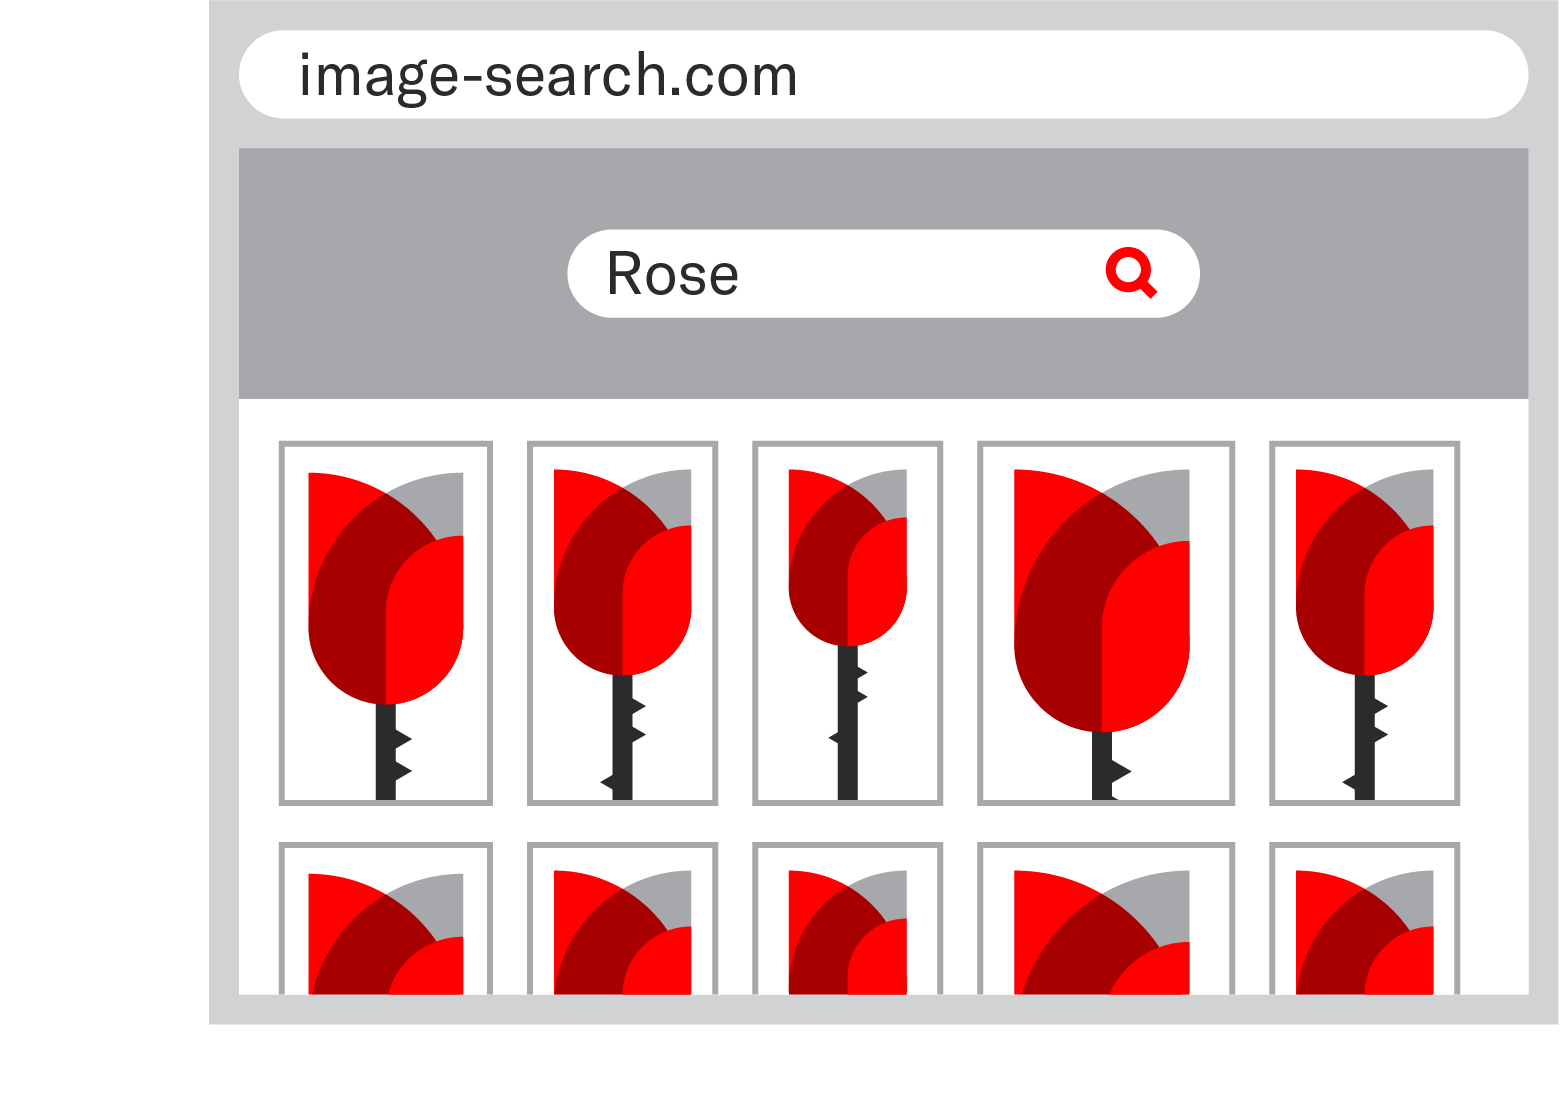 graphic of a stock image website showing many search results for the term rose